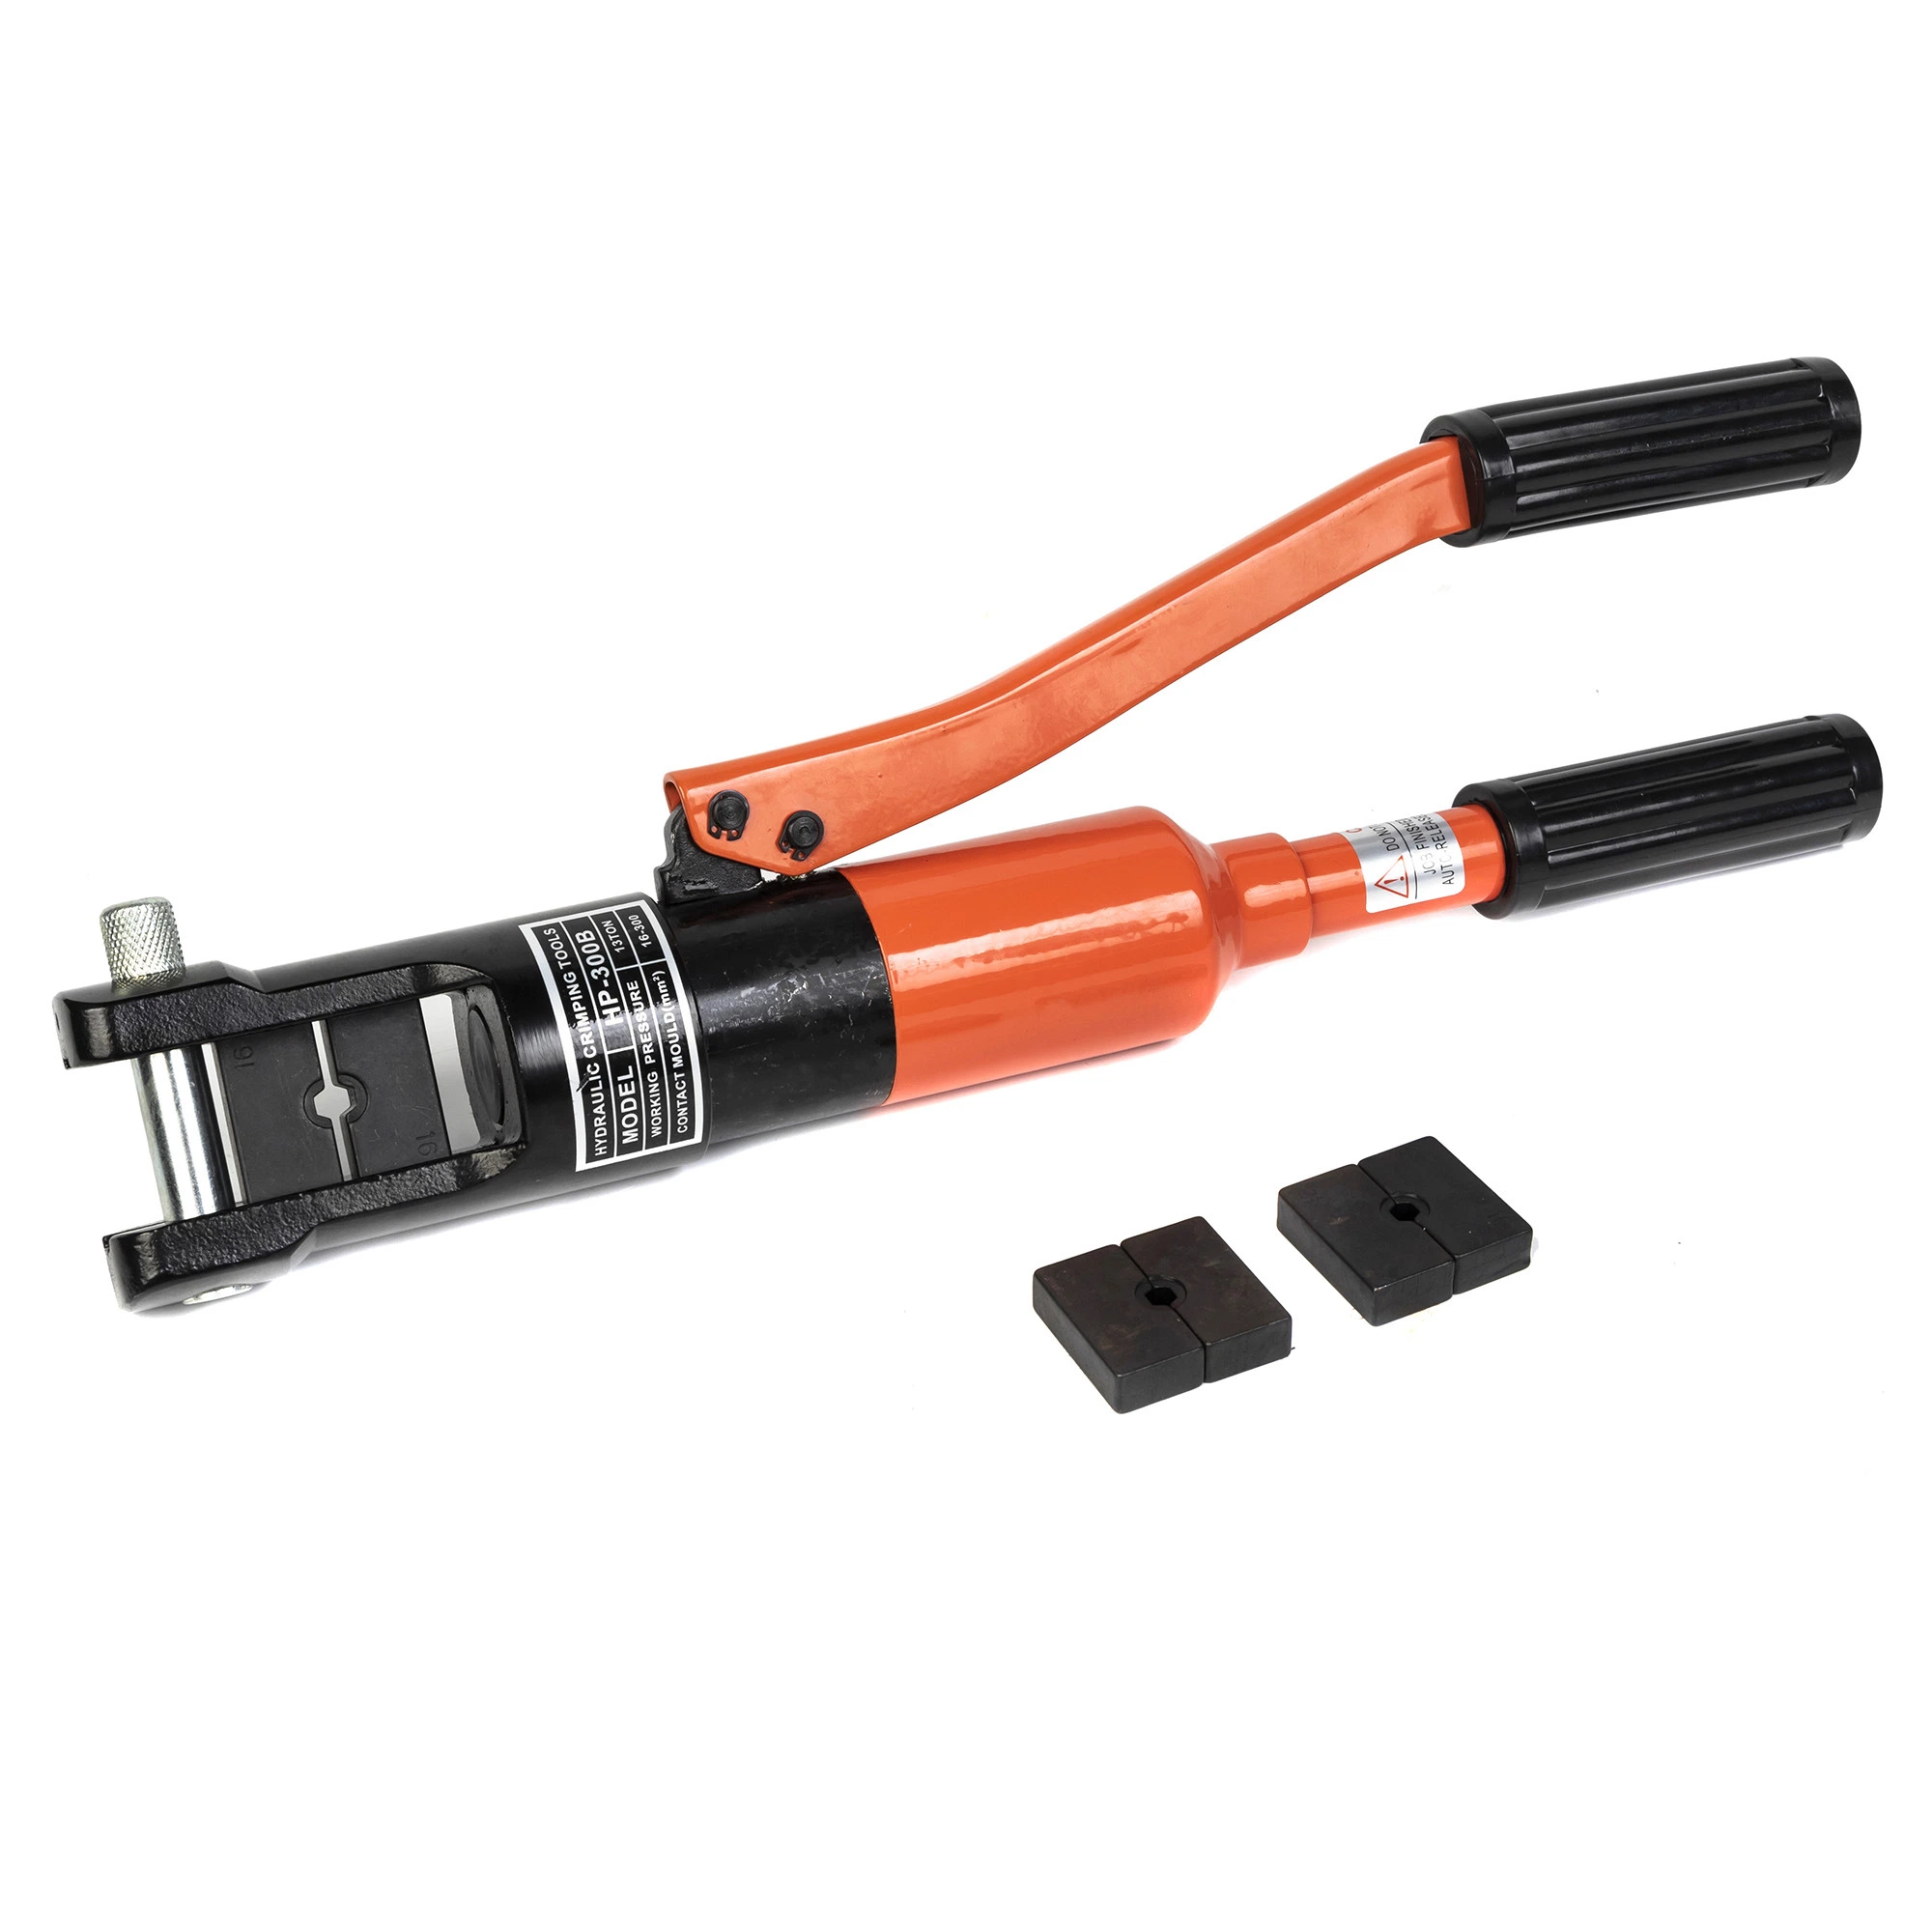 Hand Held or Portable Crimping Tools with Battery Power